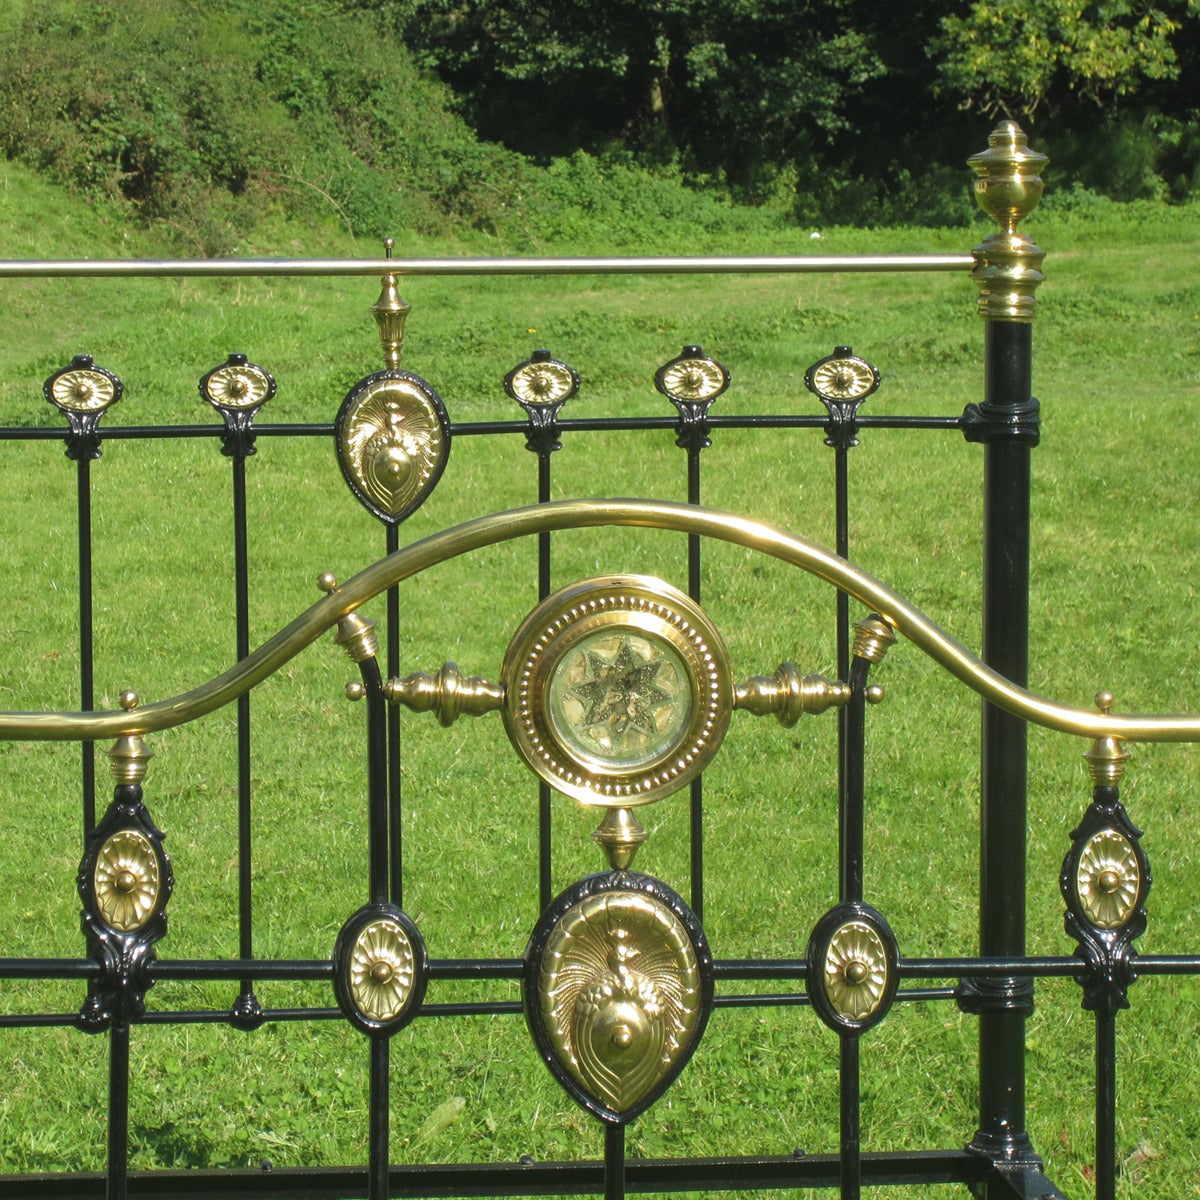 A fine brass and iron bedstead from the late Victorian era with ornate brass decoration. The central brass plaque on both the head and foot depicts a peacock. The foot of the bed has a serpentine brass top rail, under which sits a brass ring with